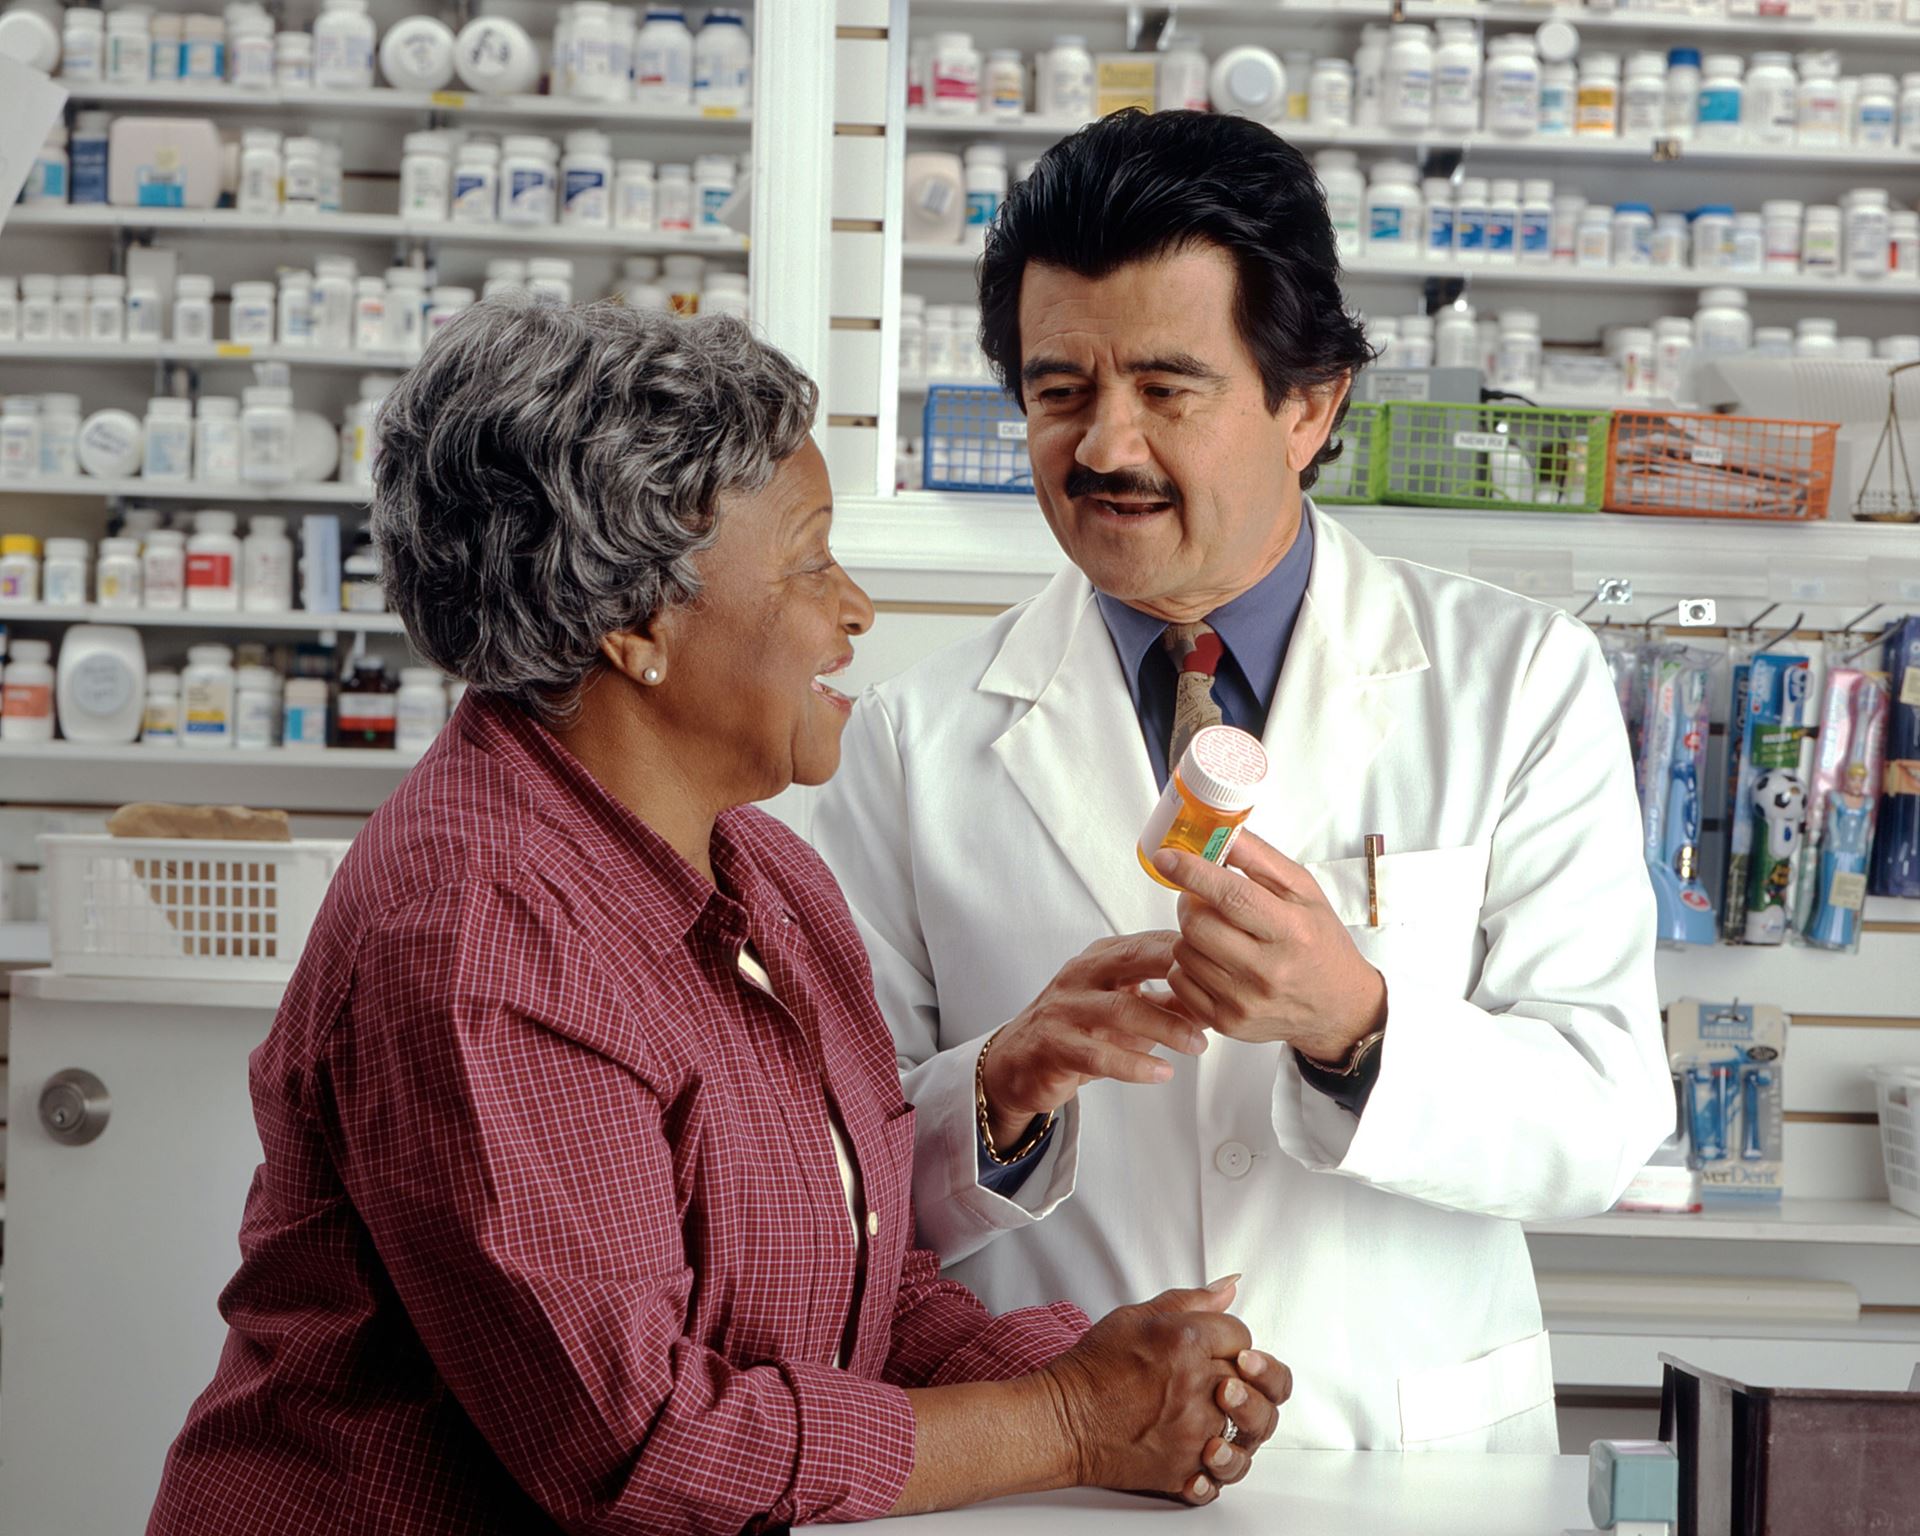 A pharmacist giving a bottle of pills to a lady with grey hair